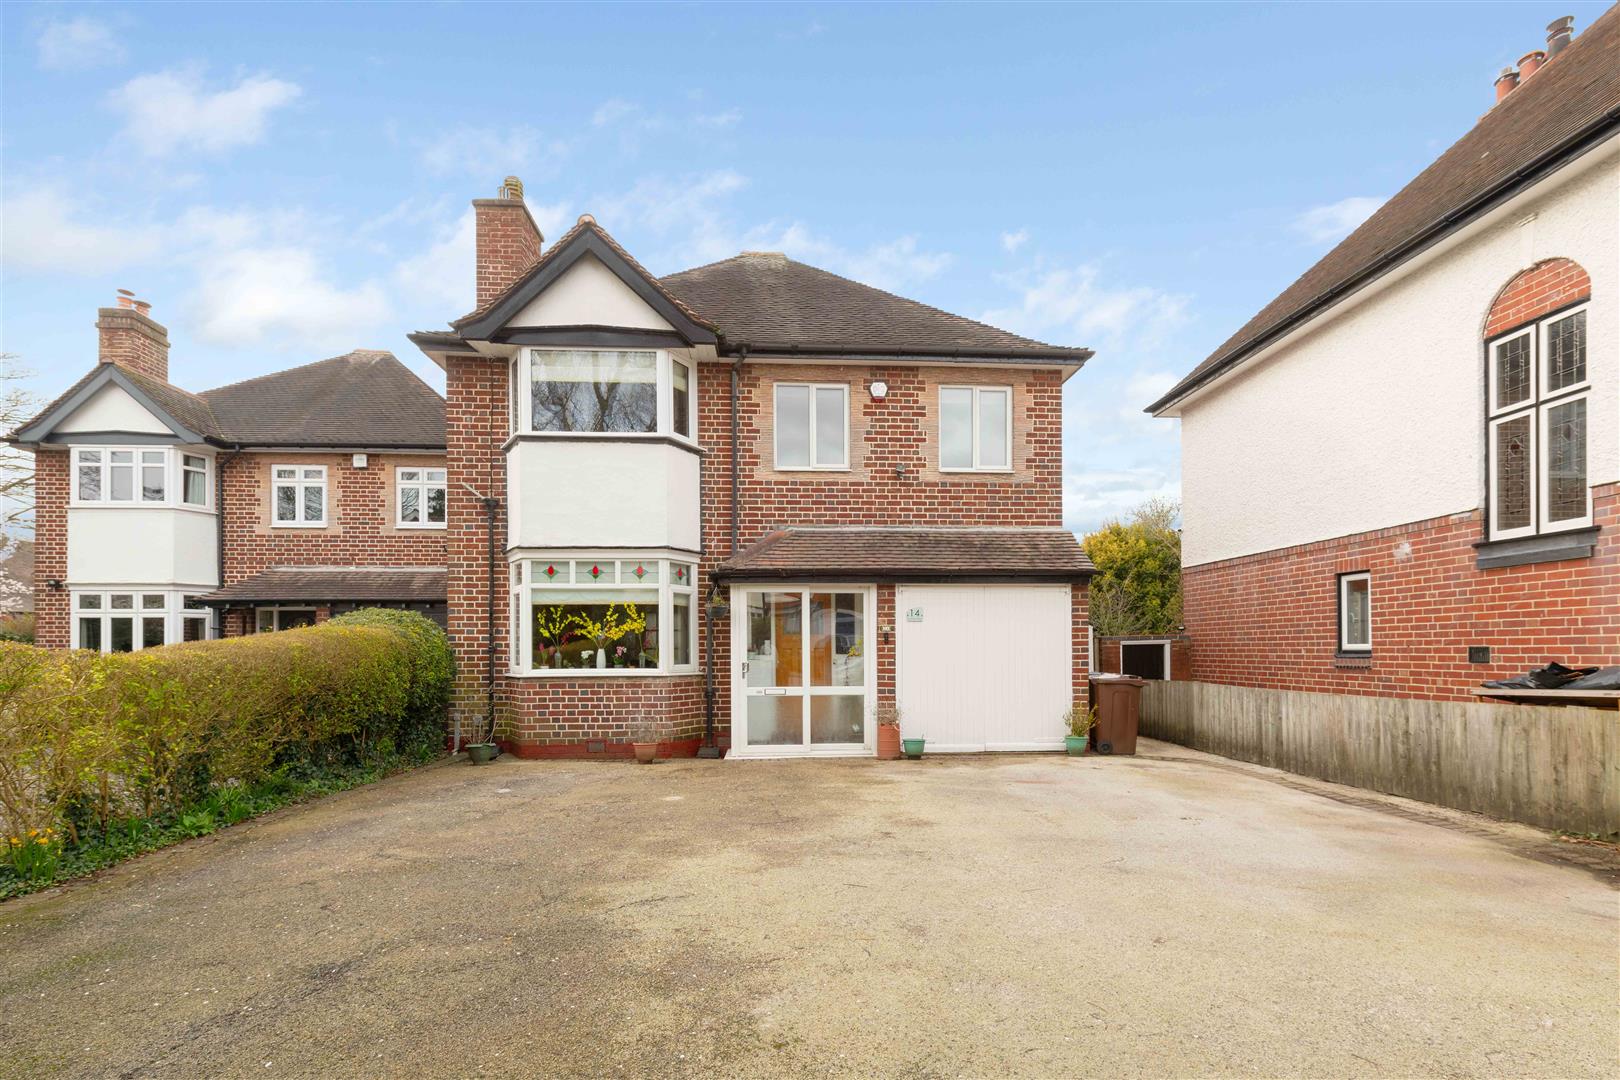 4 bed detached house for sale in Kineton Green Road, Solihull  - Property Image 2